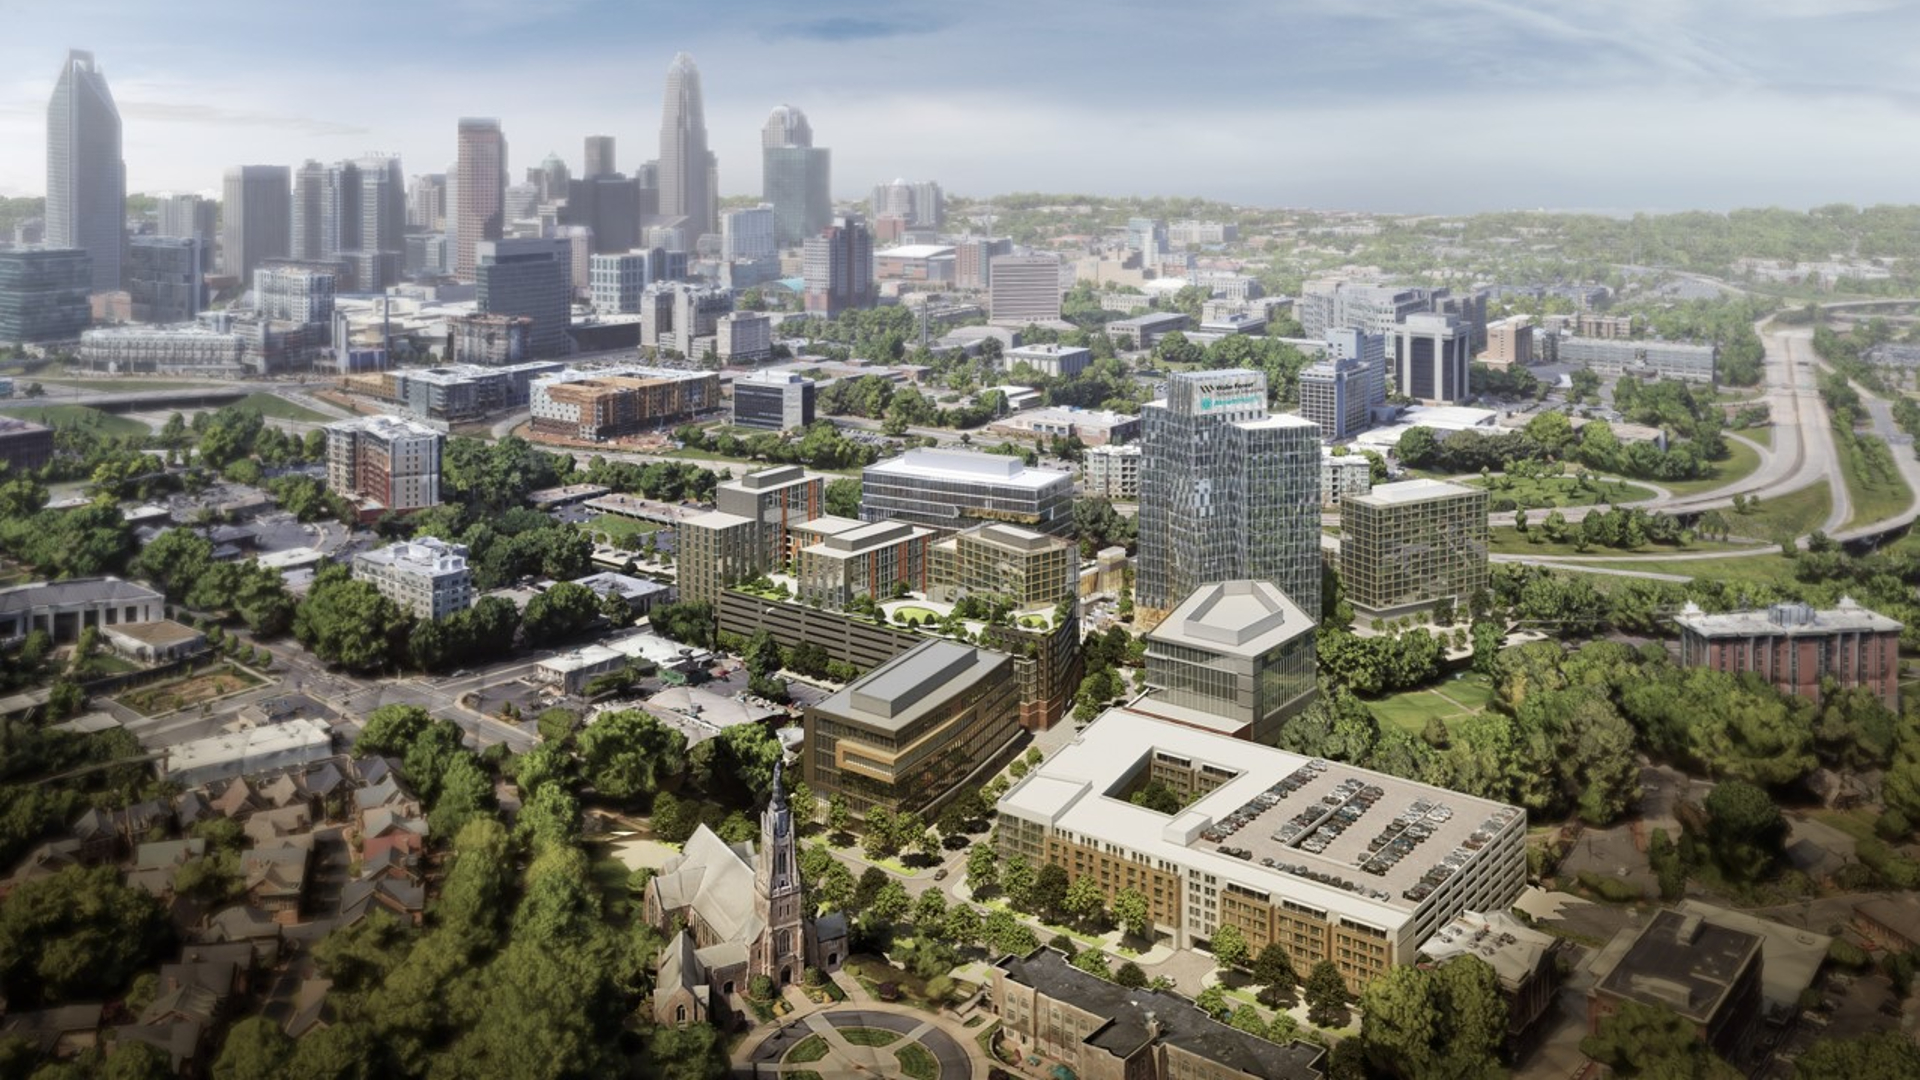 The image Woods revealed to the Charlotte Mecklenburg Housing Authority Board shows the future Charlotte campus of the Wake Forest School of Medicine as it sits in the heart of the Innovation District in the shadow of uptown Charlotte.